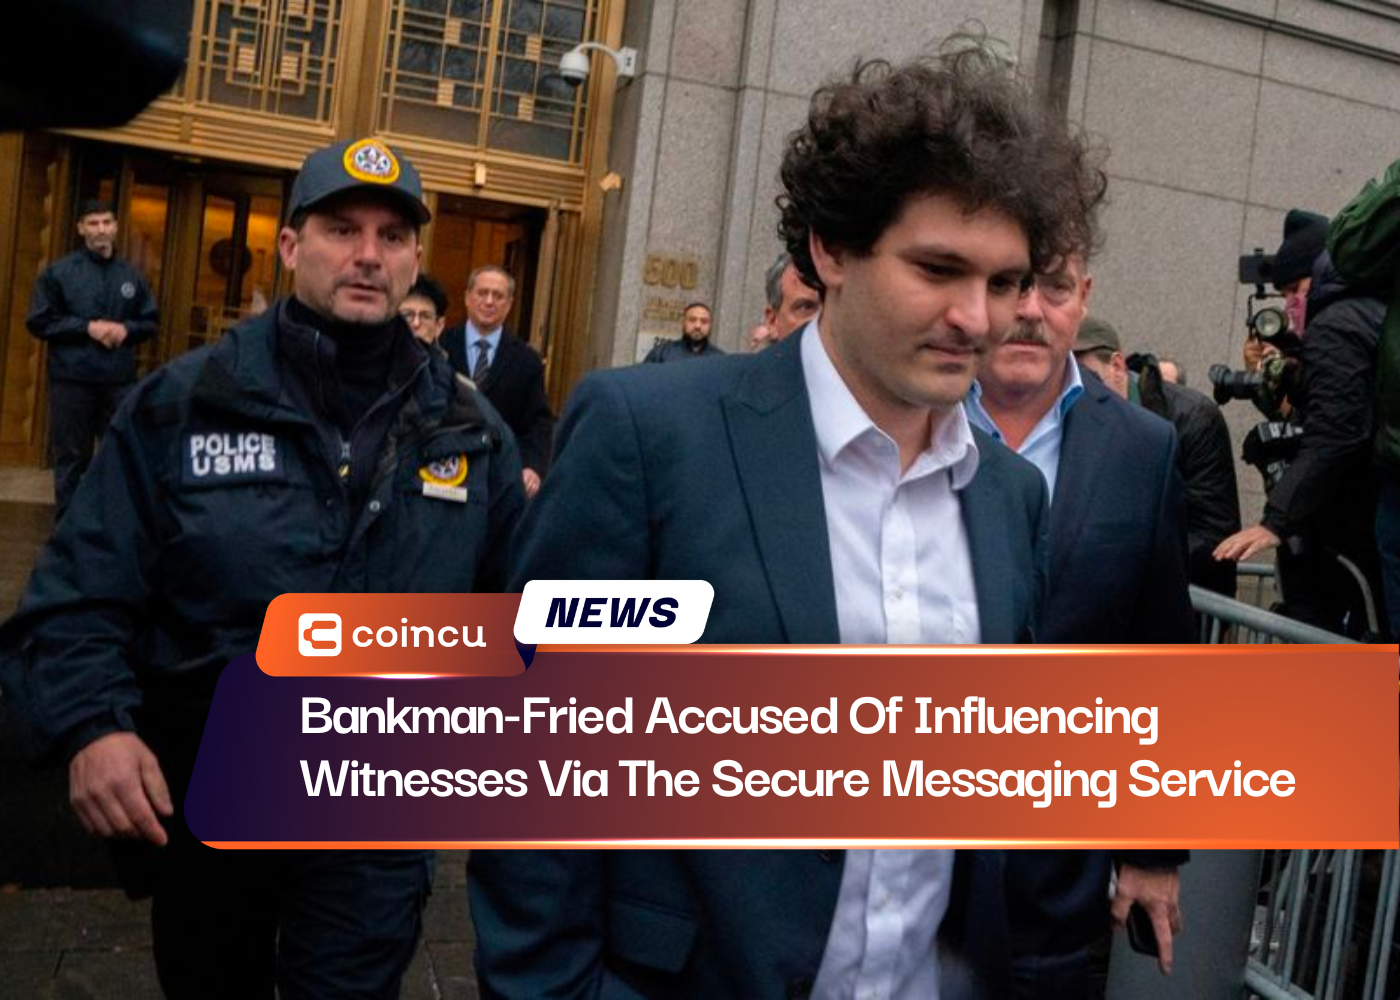 Bankman-Fried Accused Of Influencing Witnesses Via The Secure Messaging Service